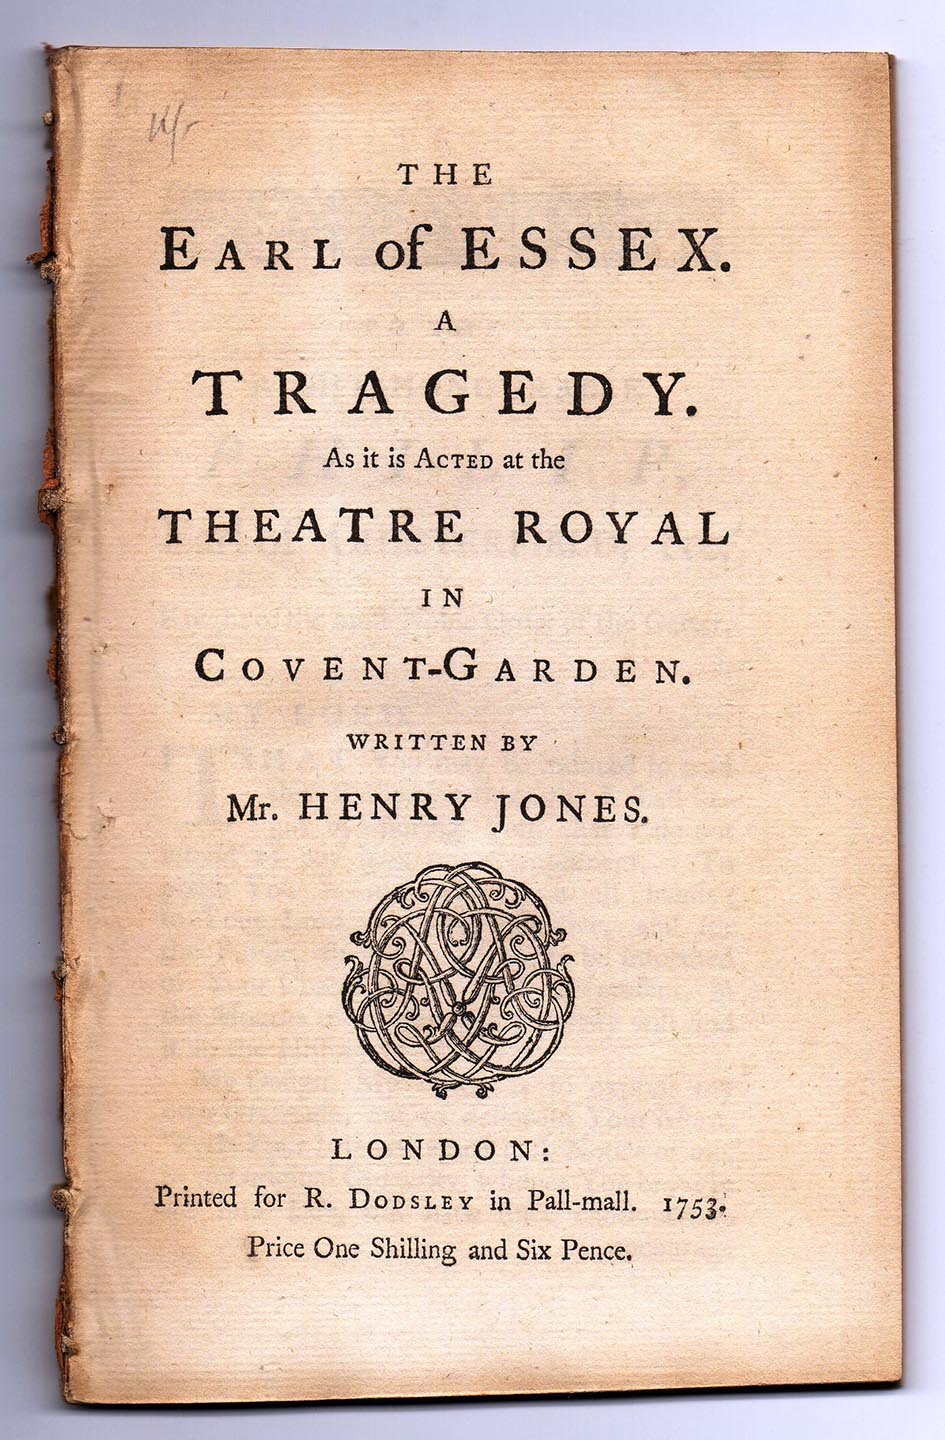 The Earl of Essex. A Tragedy. As it is Acted at the Theatre Royal in Covent-Garden